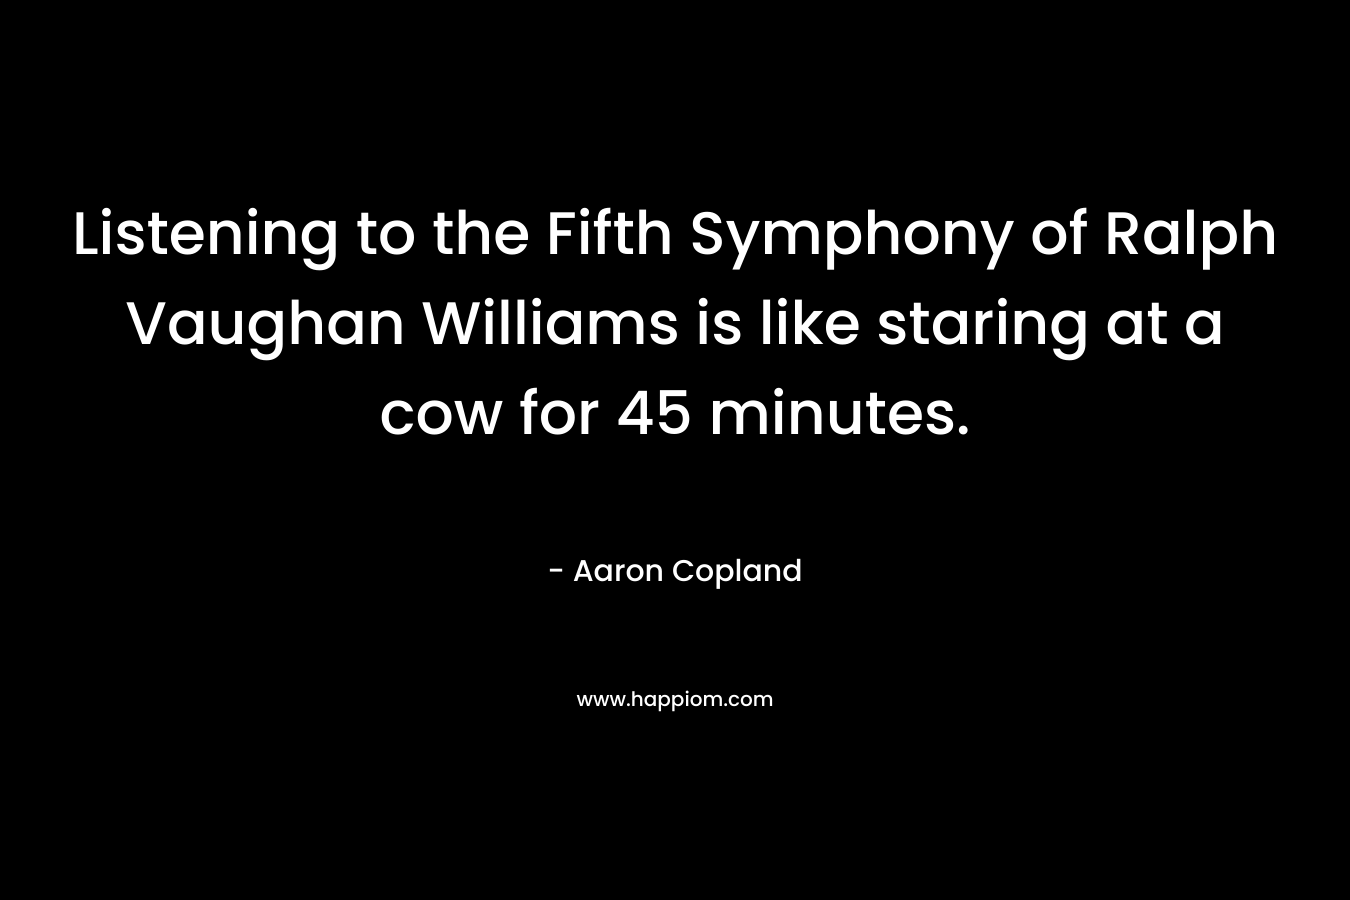 Listening to the Fifth Symphony of Ralph Vaughan Williams is like staring at a cow for 45 minutes. – Aaron Copland